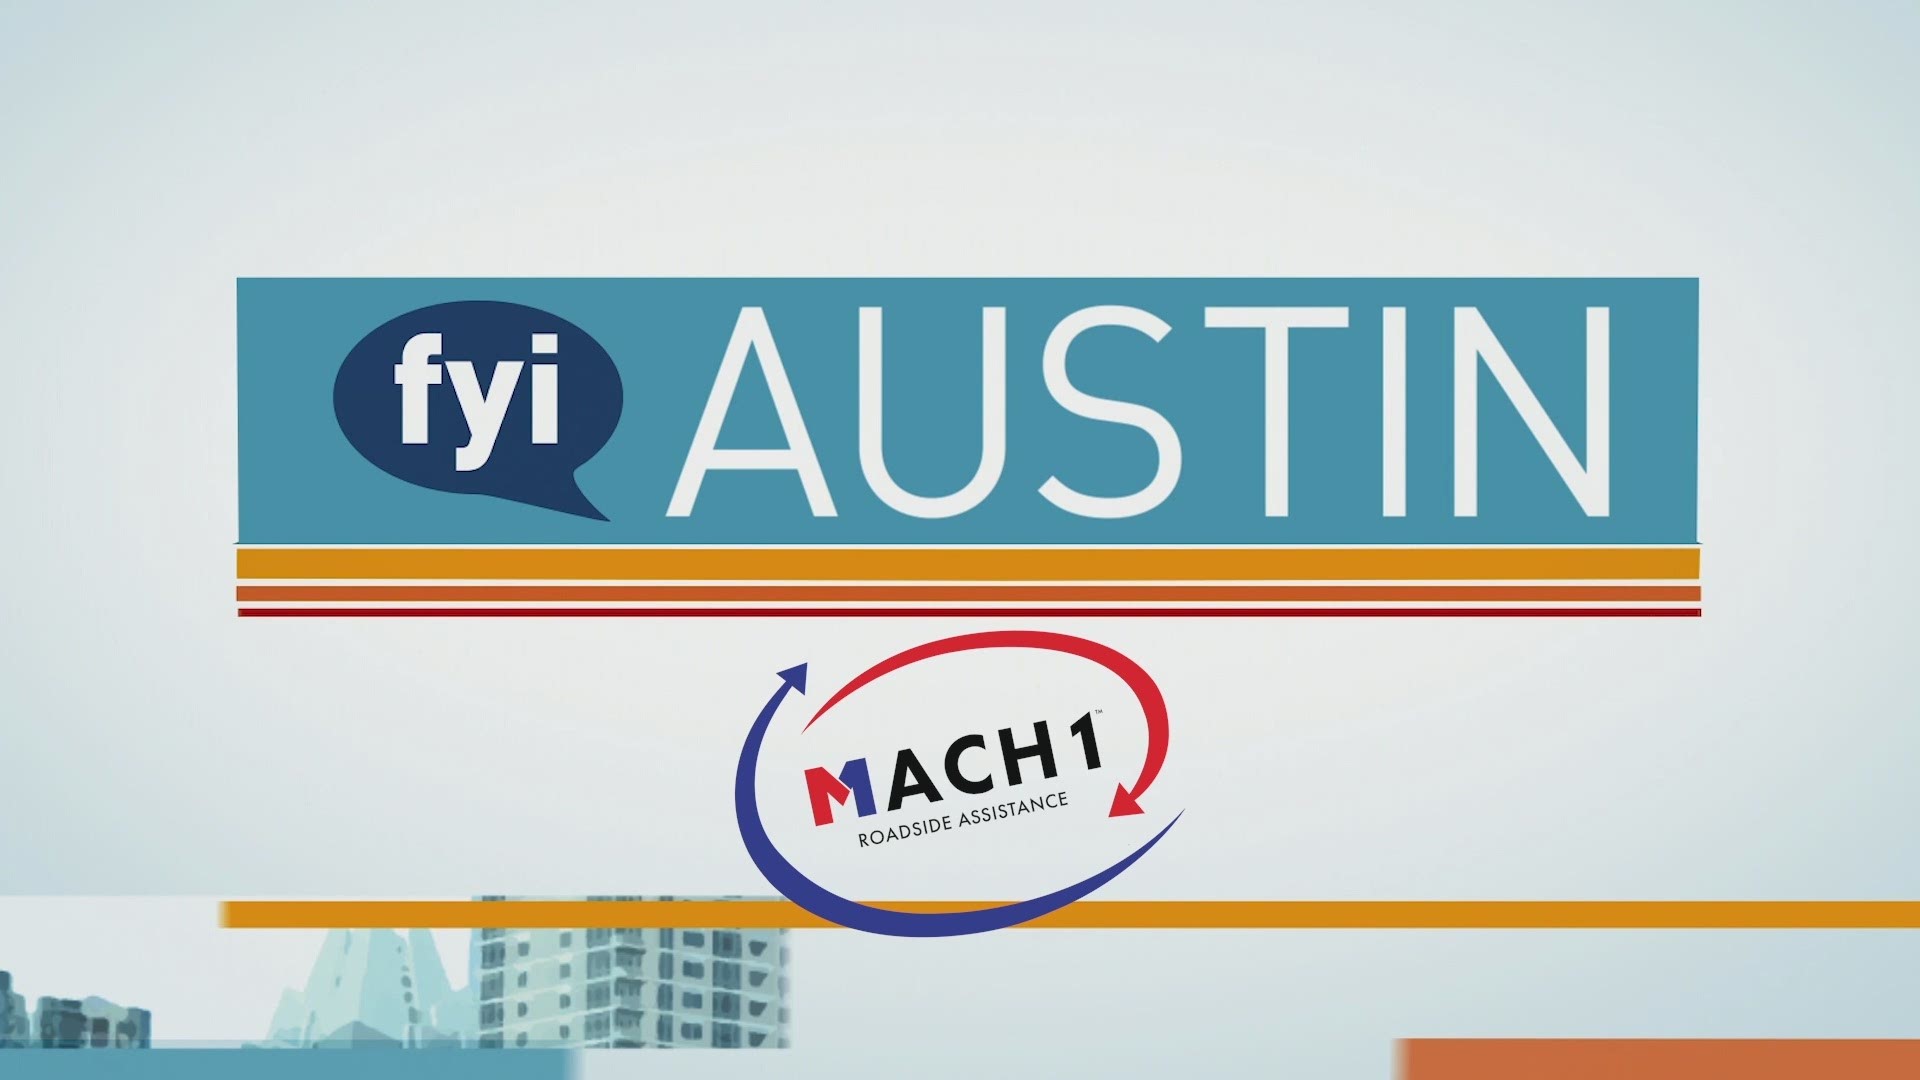 Learn about better roadside assistance with Mach 1 on FYI Austin.